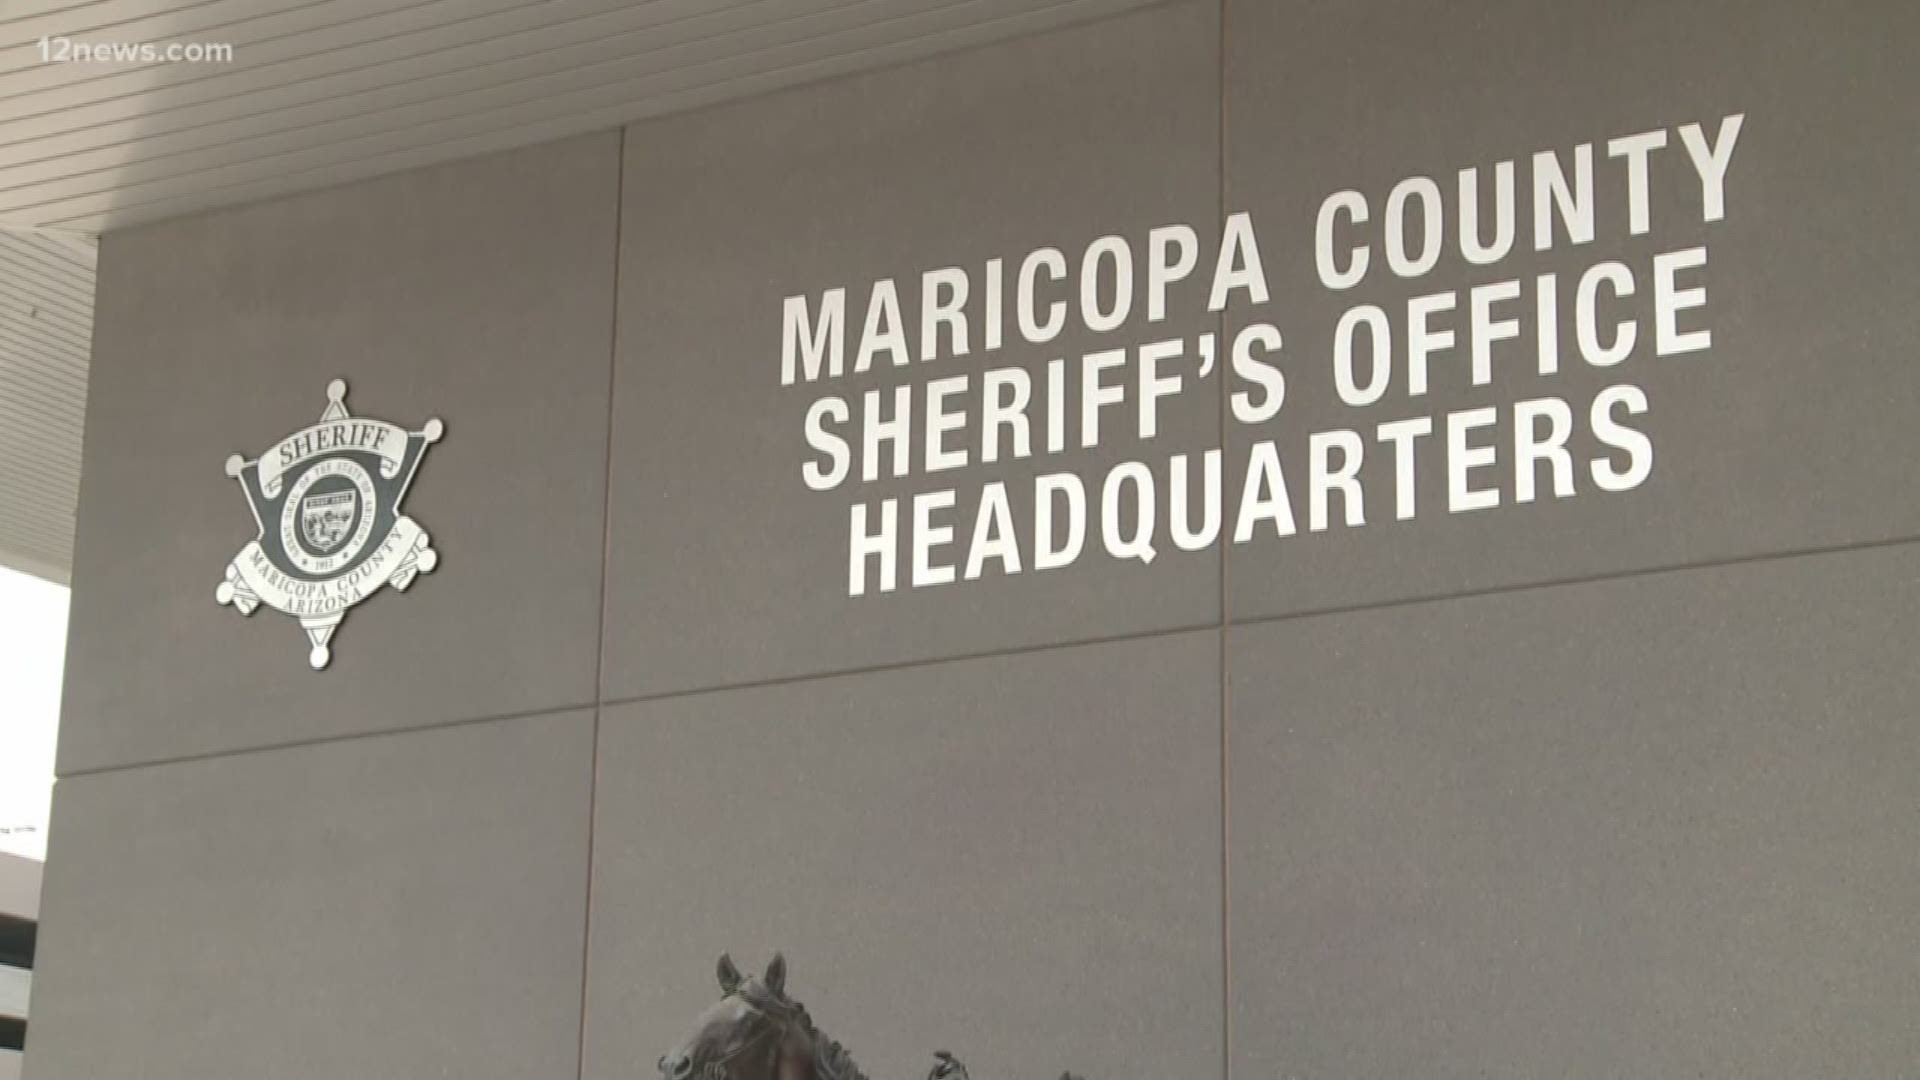 MCSO is recruiting a specific group of people, TSA agents. What are they saying to entice potential employees? The fact that Maricopa County government is "open for business and never shuts down".